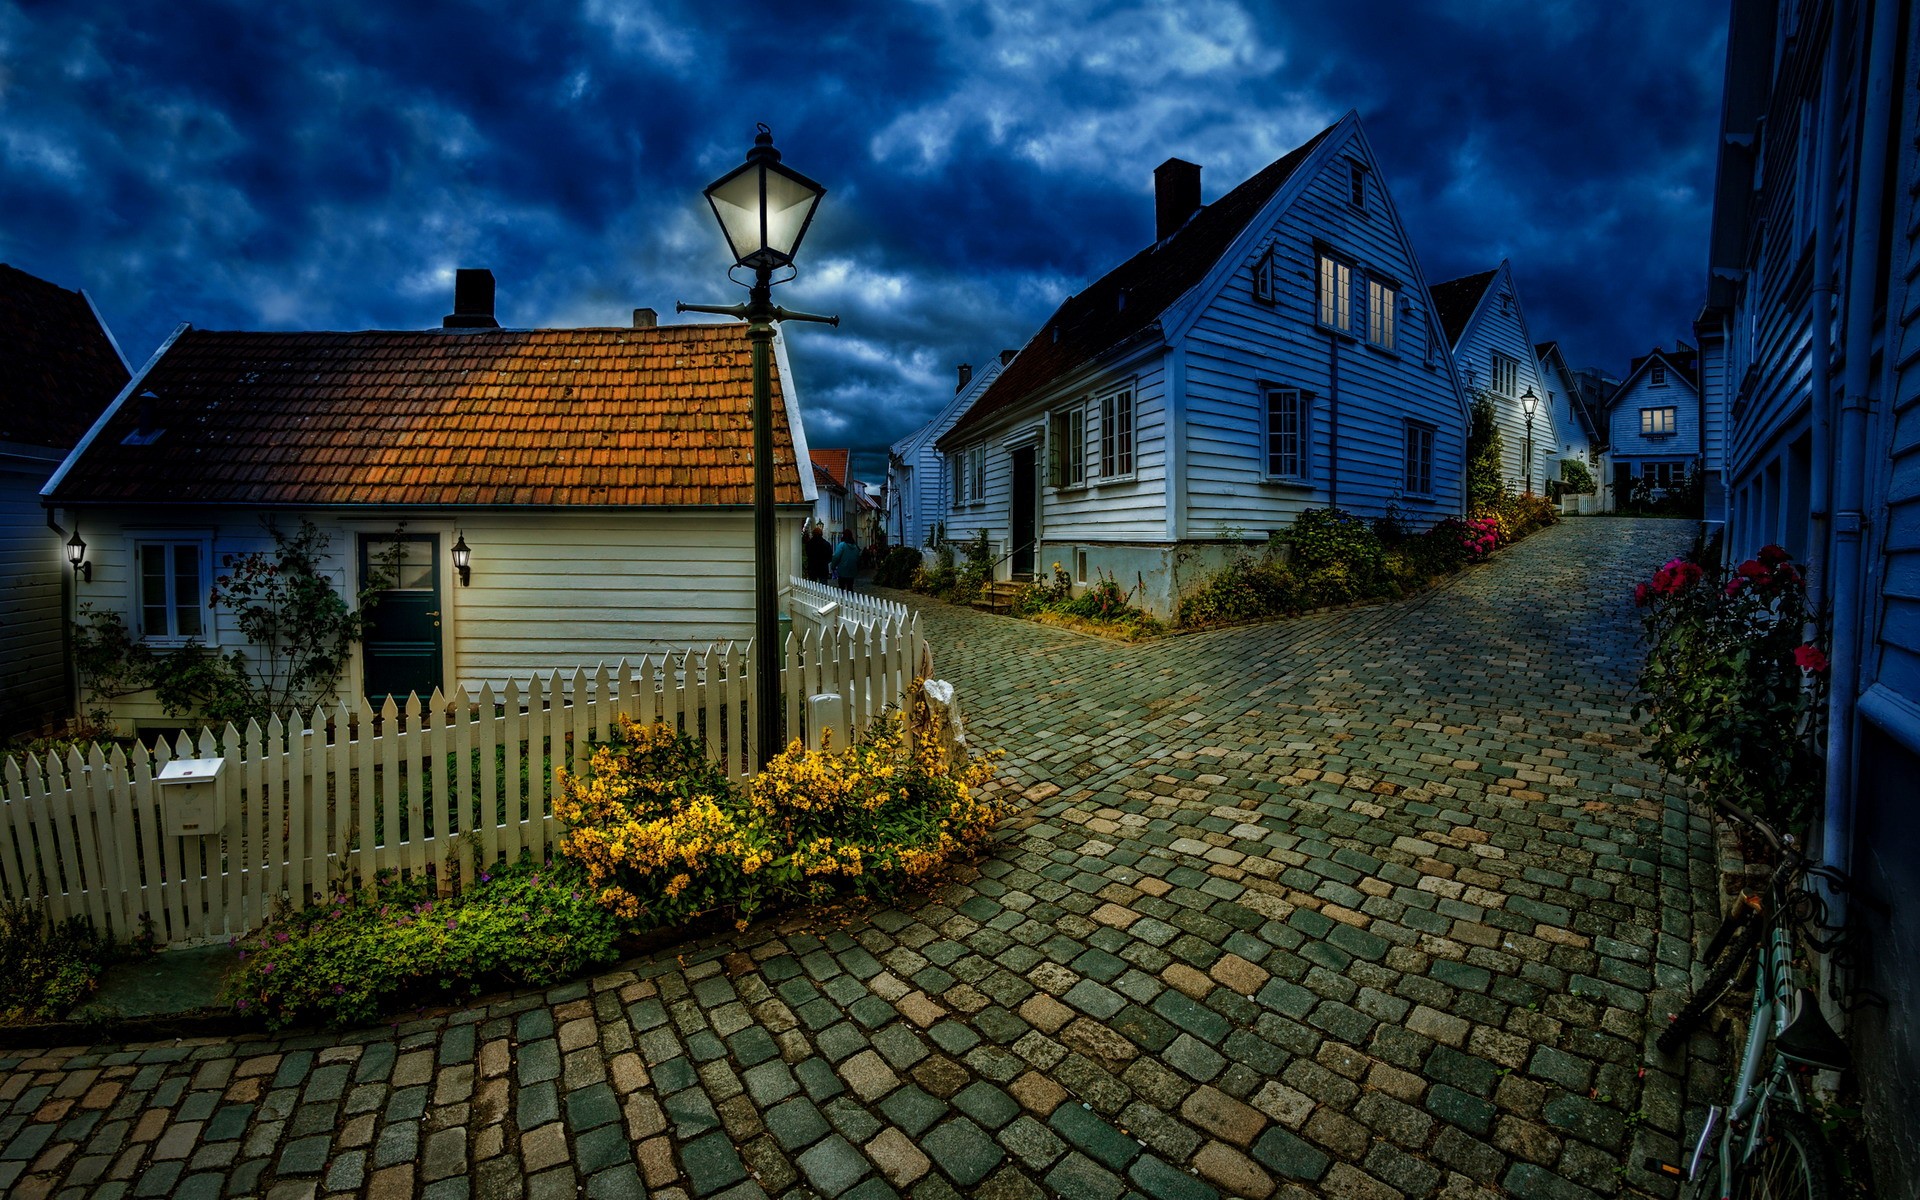 architecture, Building, Nature, Norway, House, Night, Street, Village